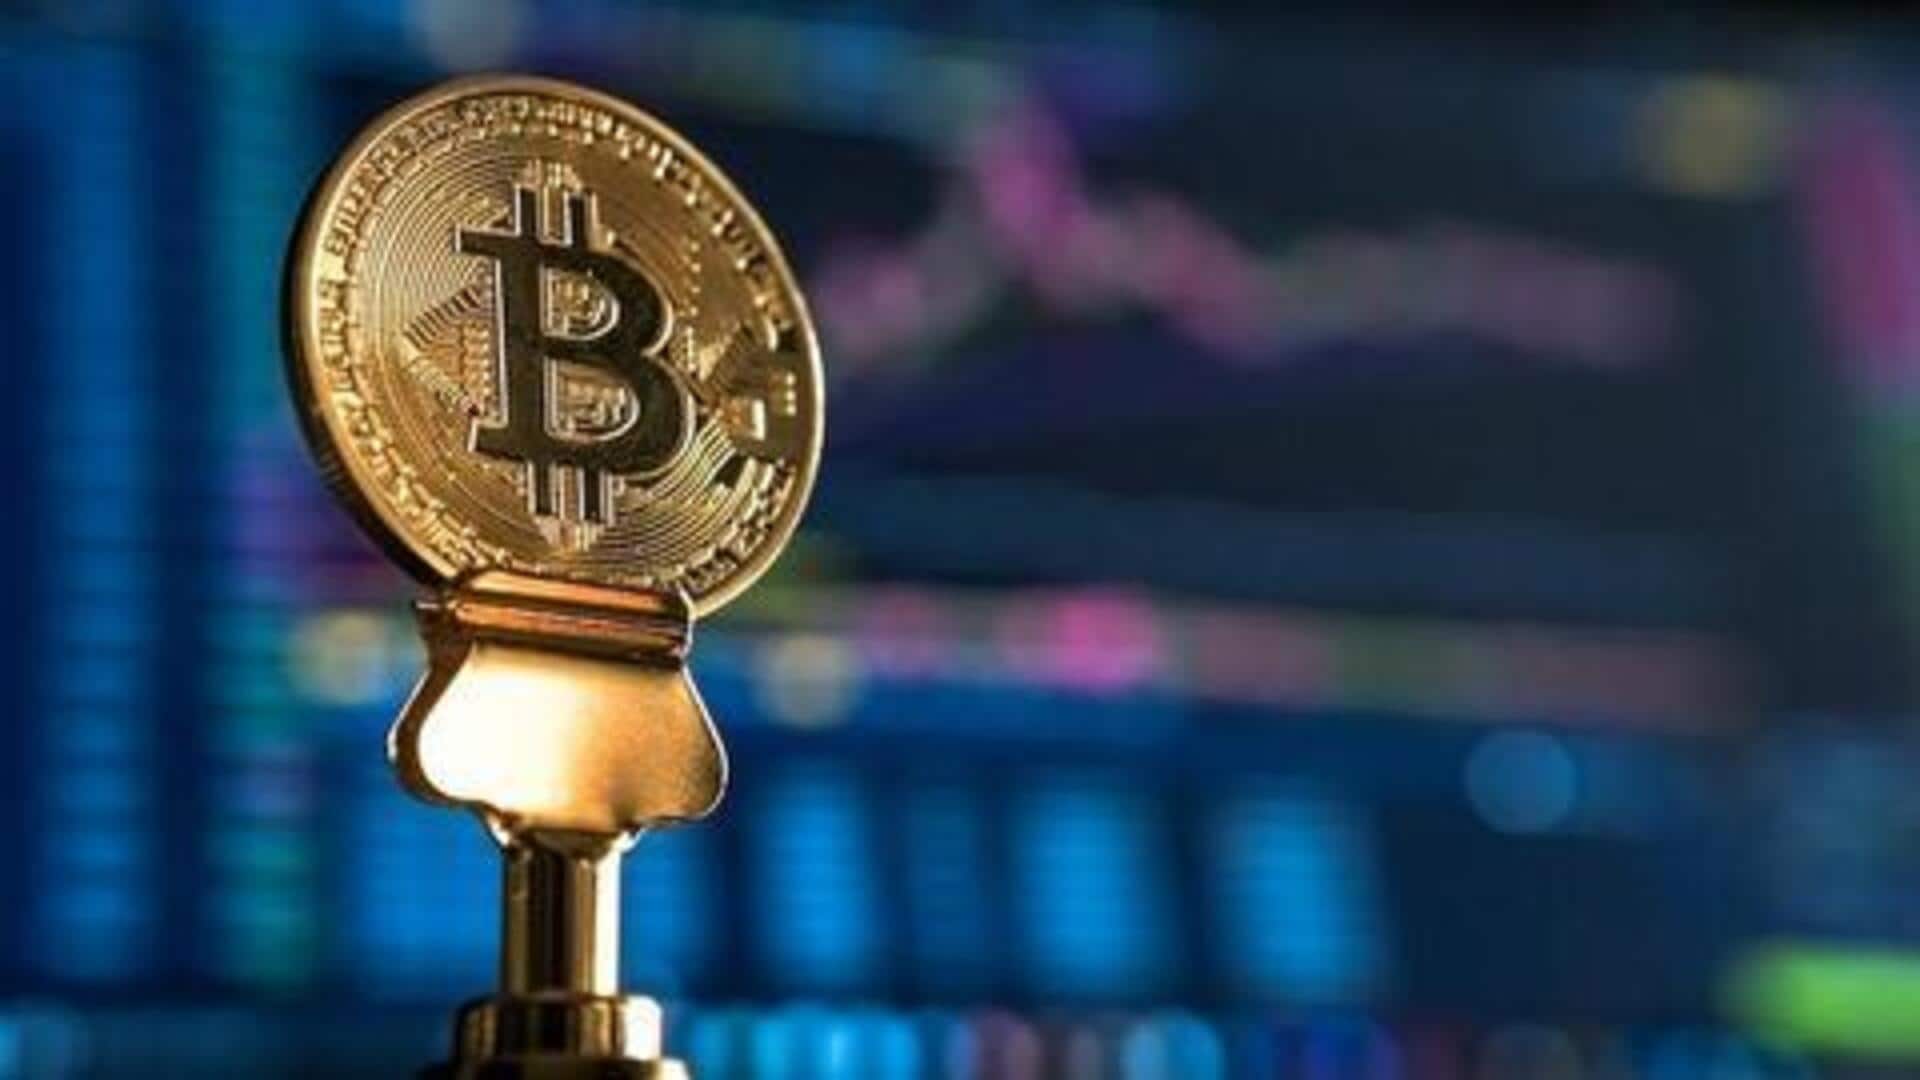 Cryptocurrency prices: Here are rates of Bitcoin, Ethereum, Dogecoin, Tether